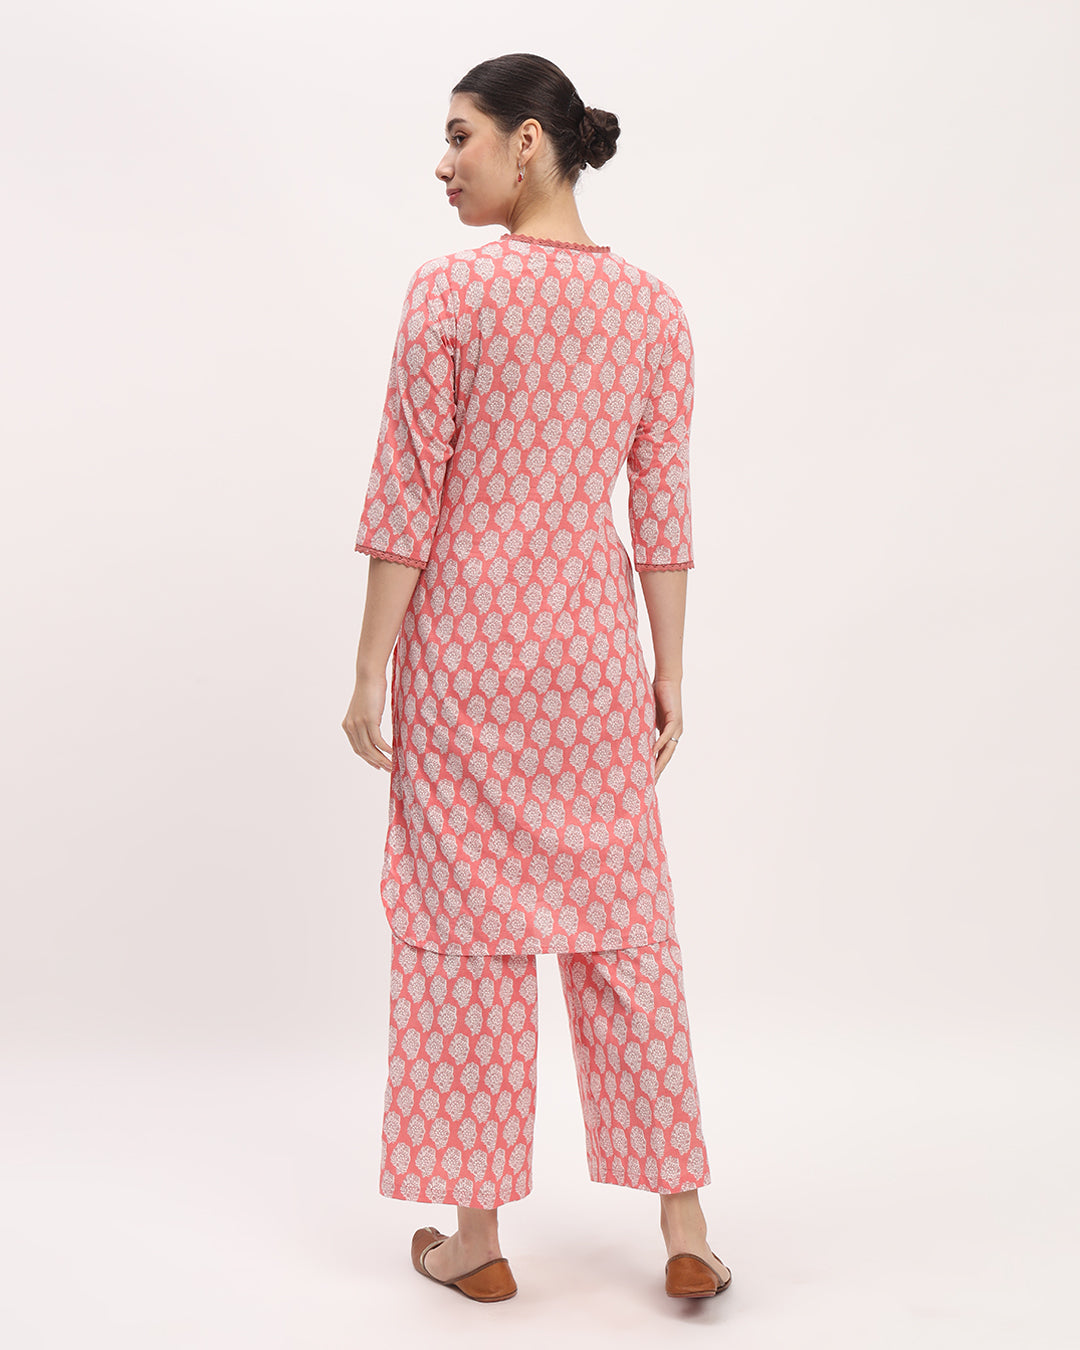 Combo: English Floral Garden & Flora Fables Lace Affair Printed Kurta (Without Bottoms)